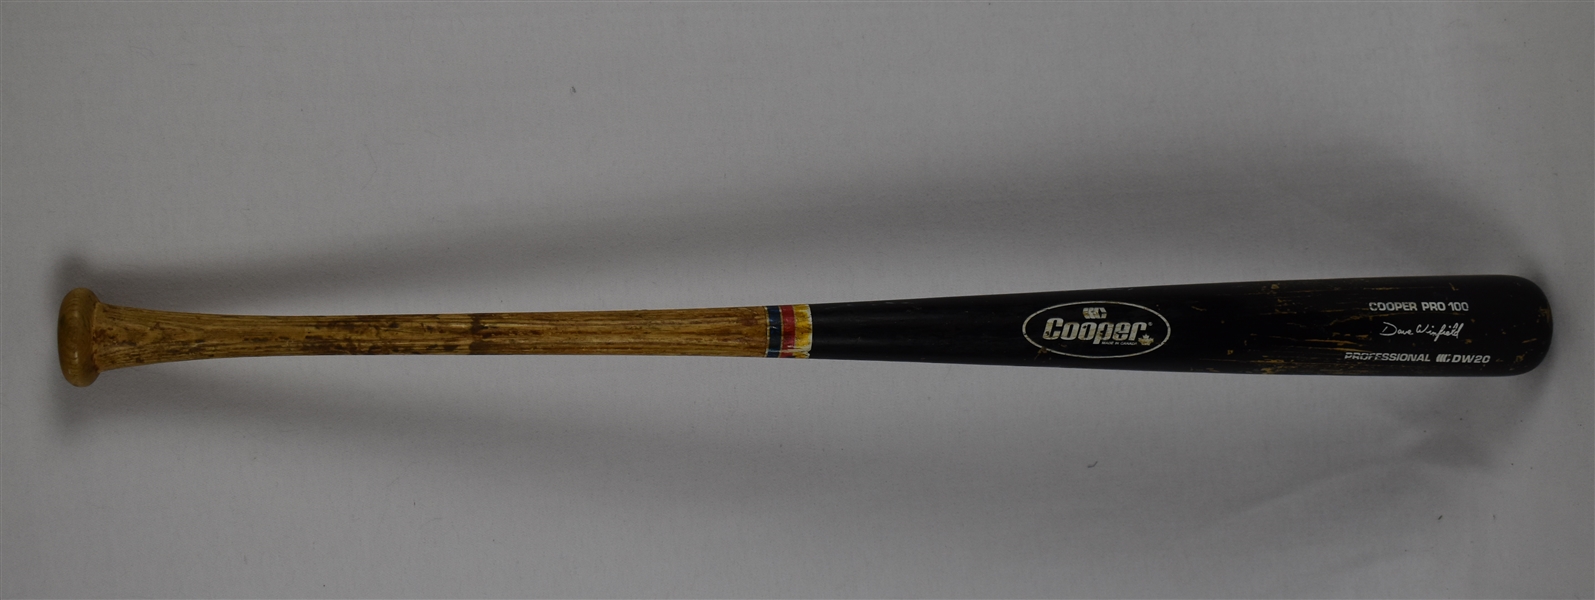 Dave Winfield 1995 Cleveland Indians Game Used Bat 